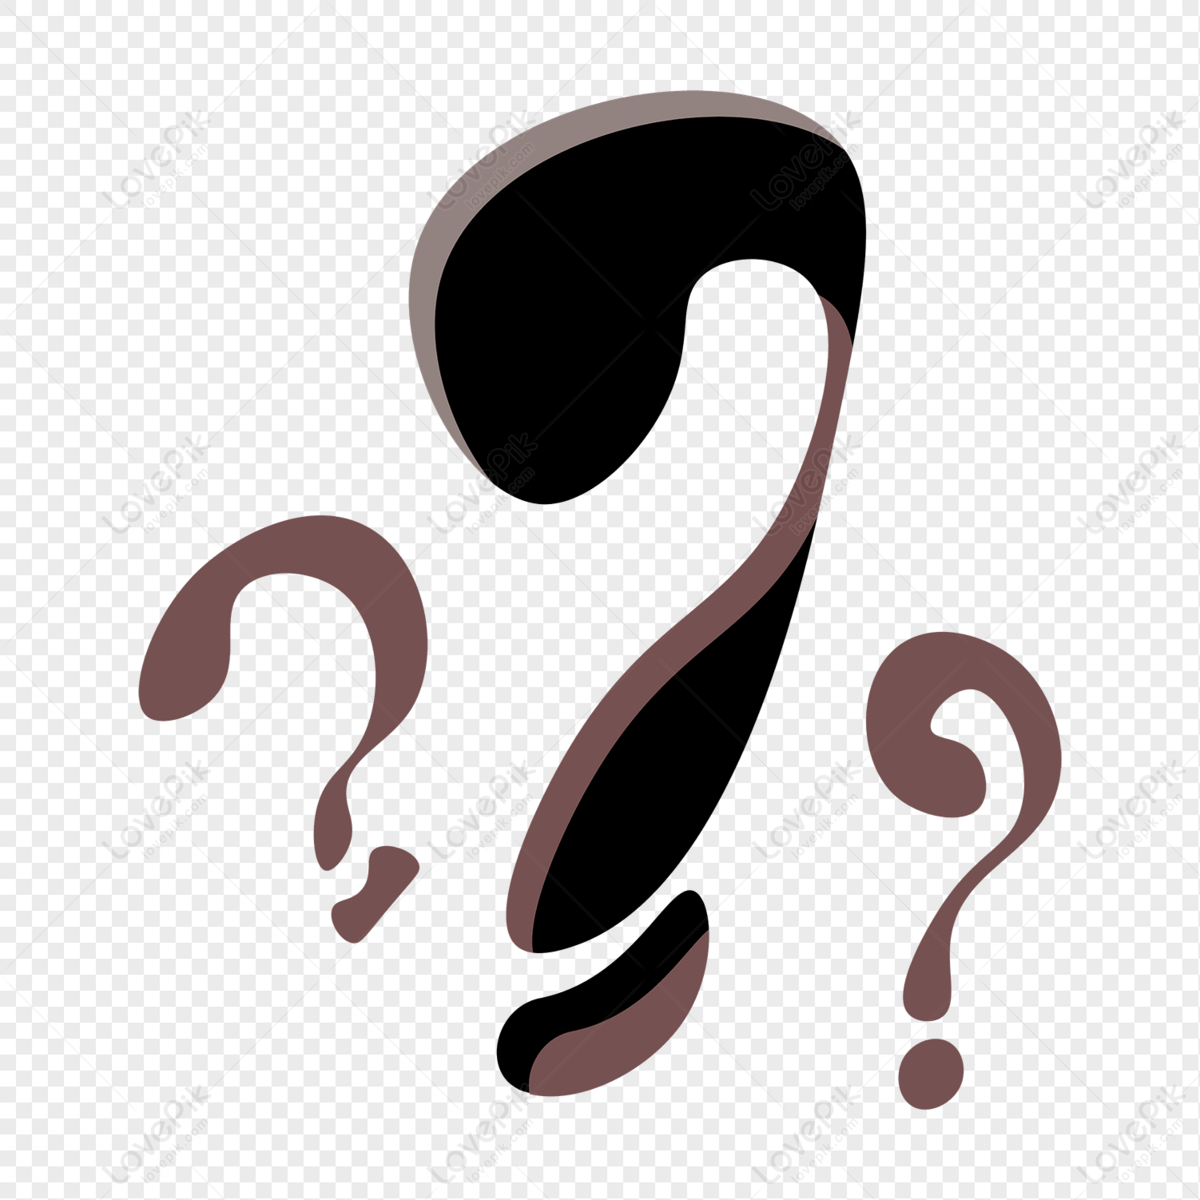 Question mark basic element icon Royalty Free Vector Image